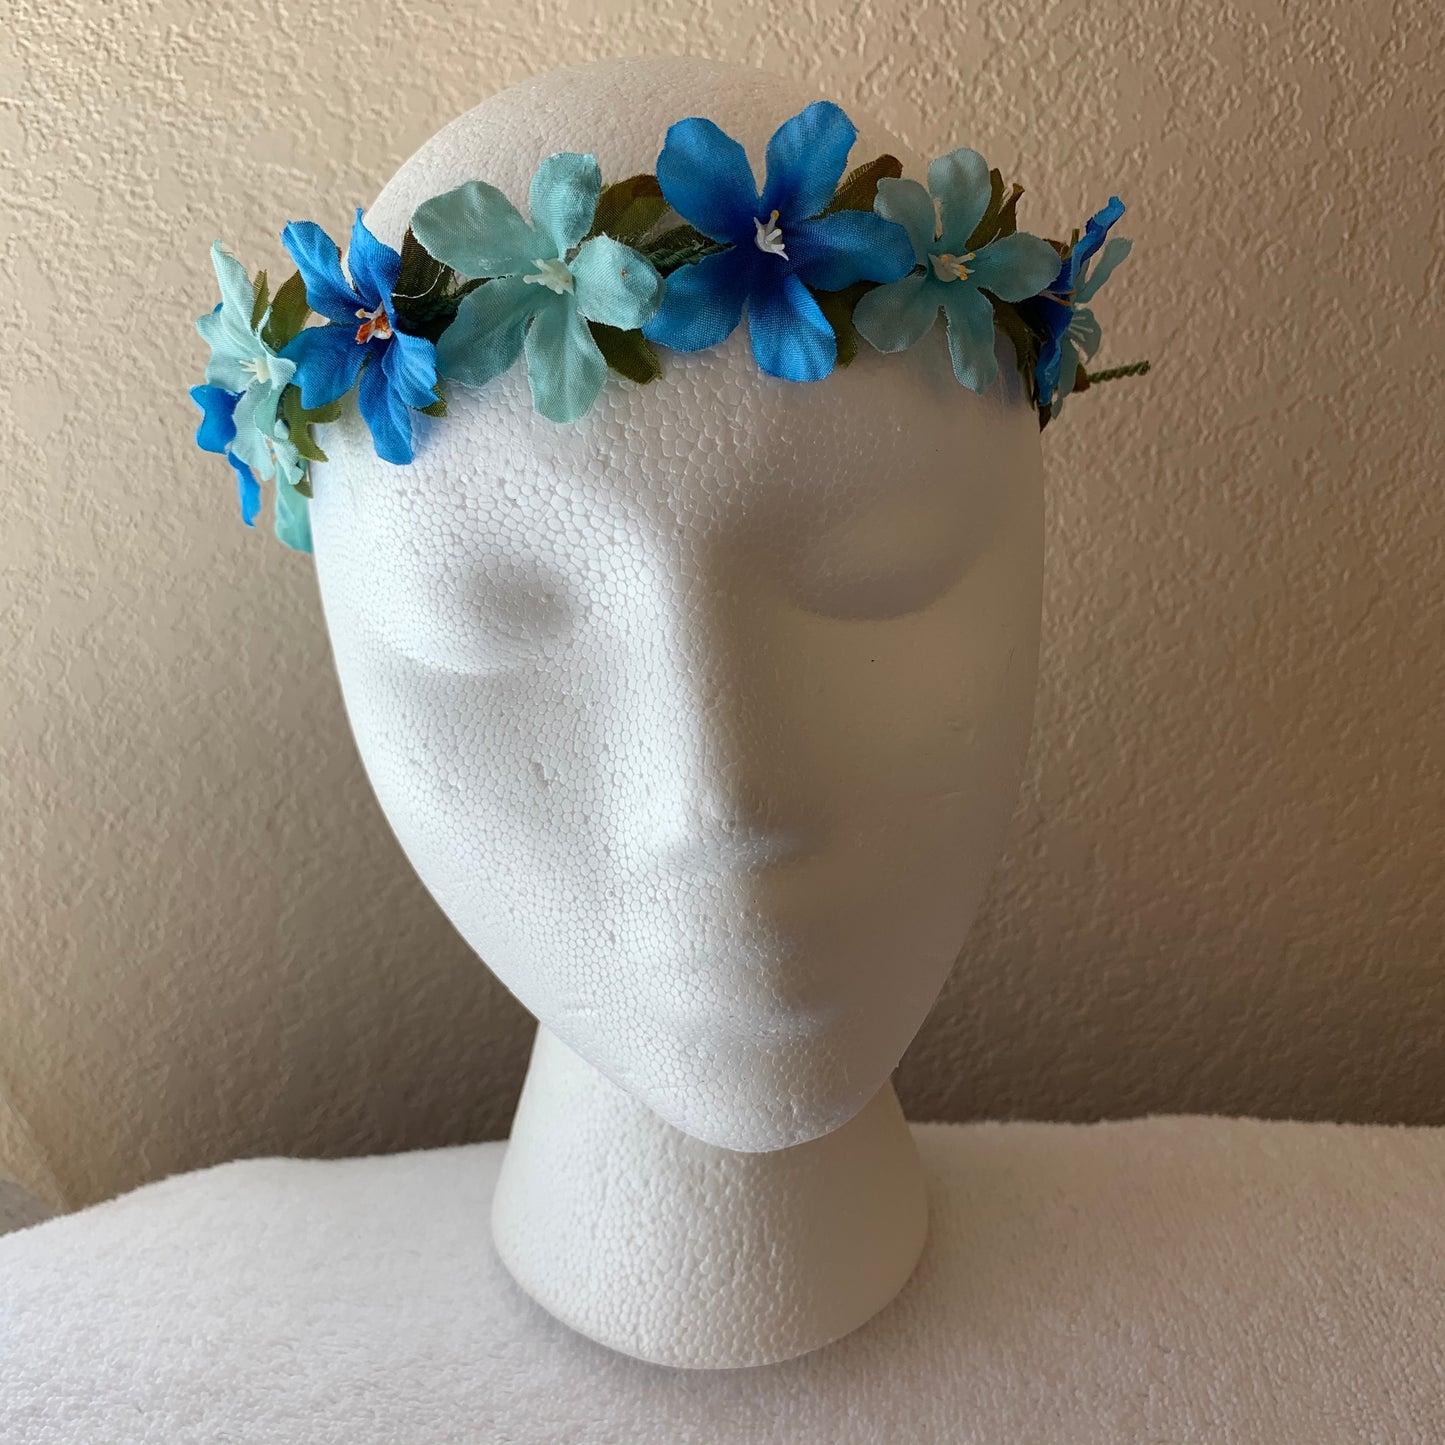 Extra Small Wreath - Dark Blue and Light Blue Flowers